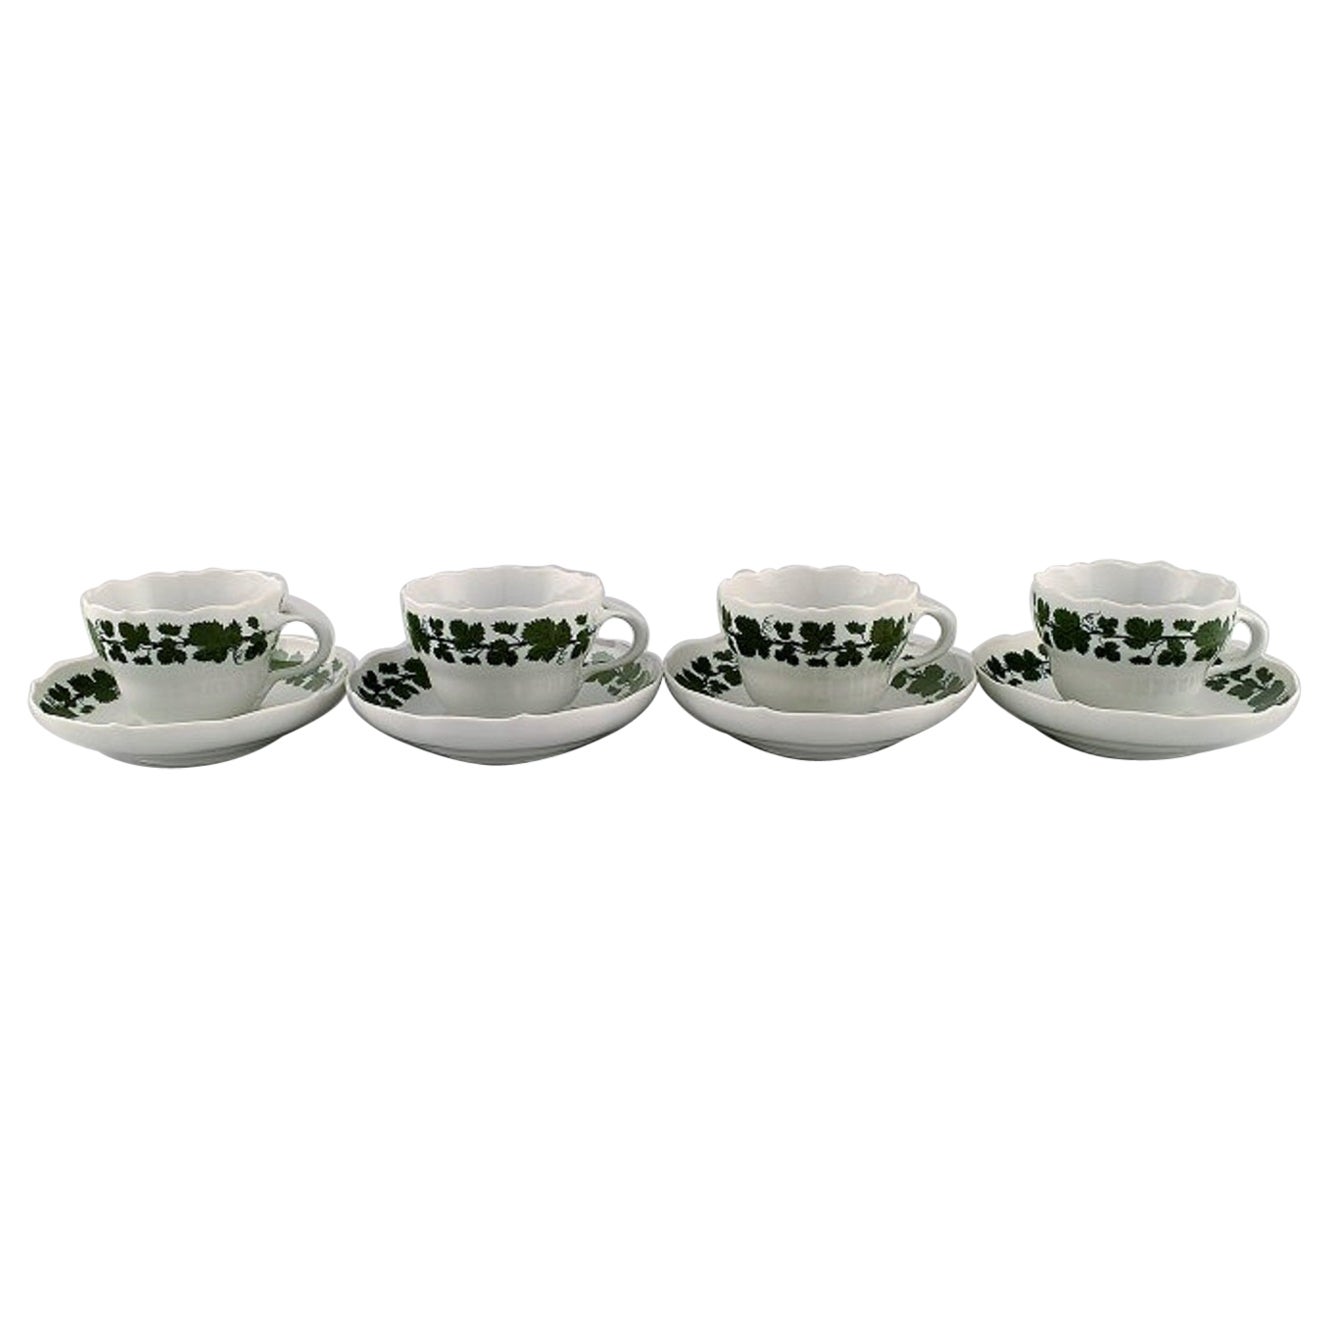 Four Meissen Green Ivy Vine Coffee Cups with Saucers in Hand-Painted Porcelain